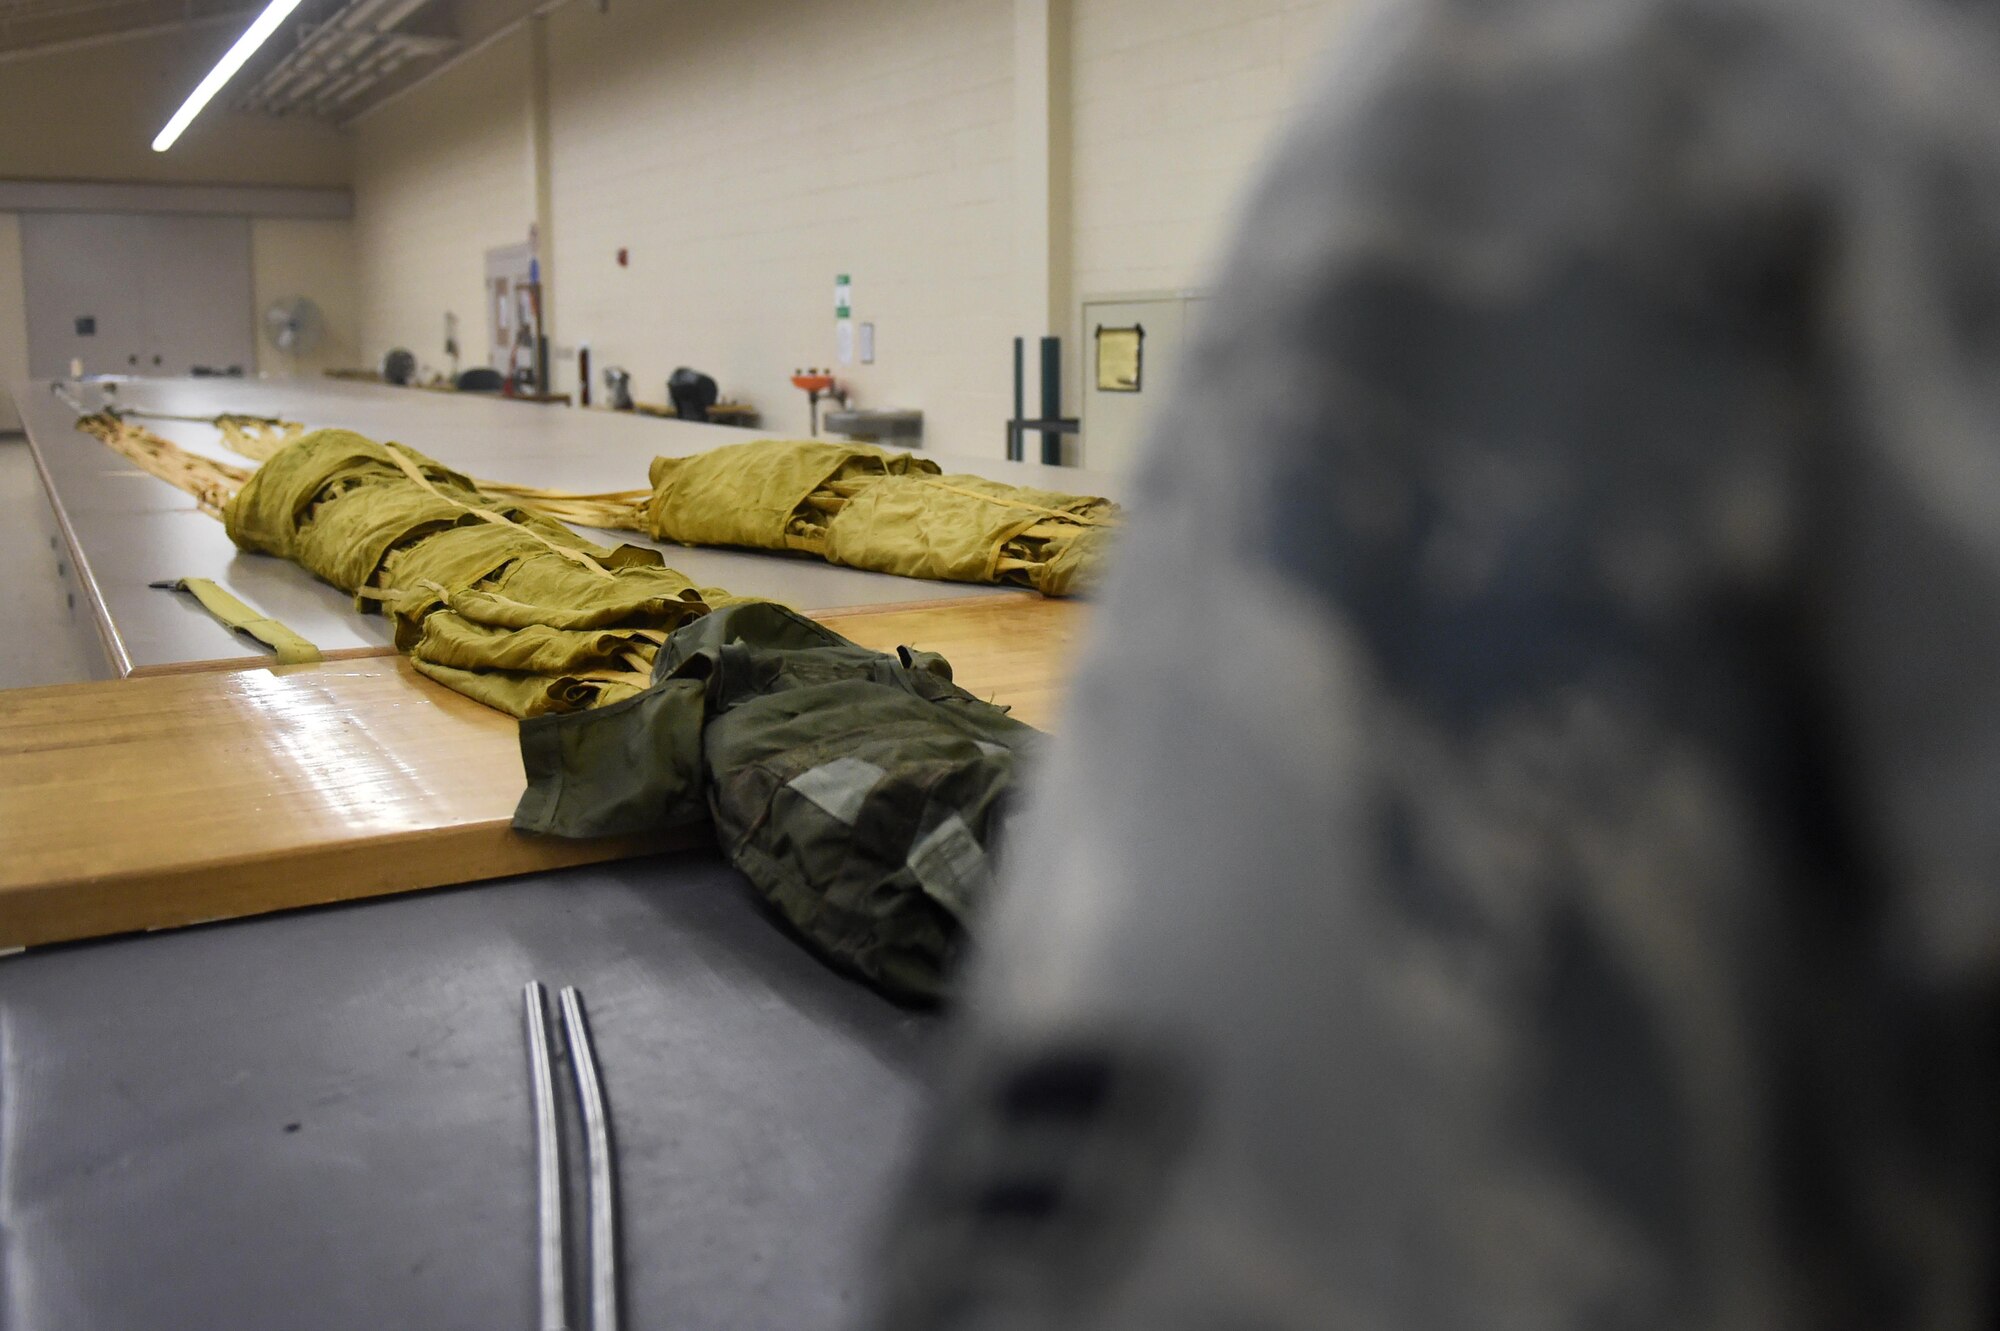 Airman 1st Class Dondrel, a 49th Operations Support Squadron aircrew flight equipment technician, prepares to pack a parachute at Holloman Air Force Base, N.M., July 21. AFE personnel issue, fit, repair, and maintain equipment such as parachutes, helmets, and oxygen equipment. (Last names are being withheld due to operational requirements. U.S. Air Force photo by Staff Sgt. Eboni Prince)